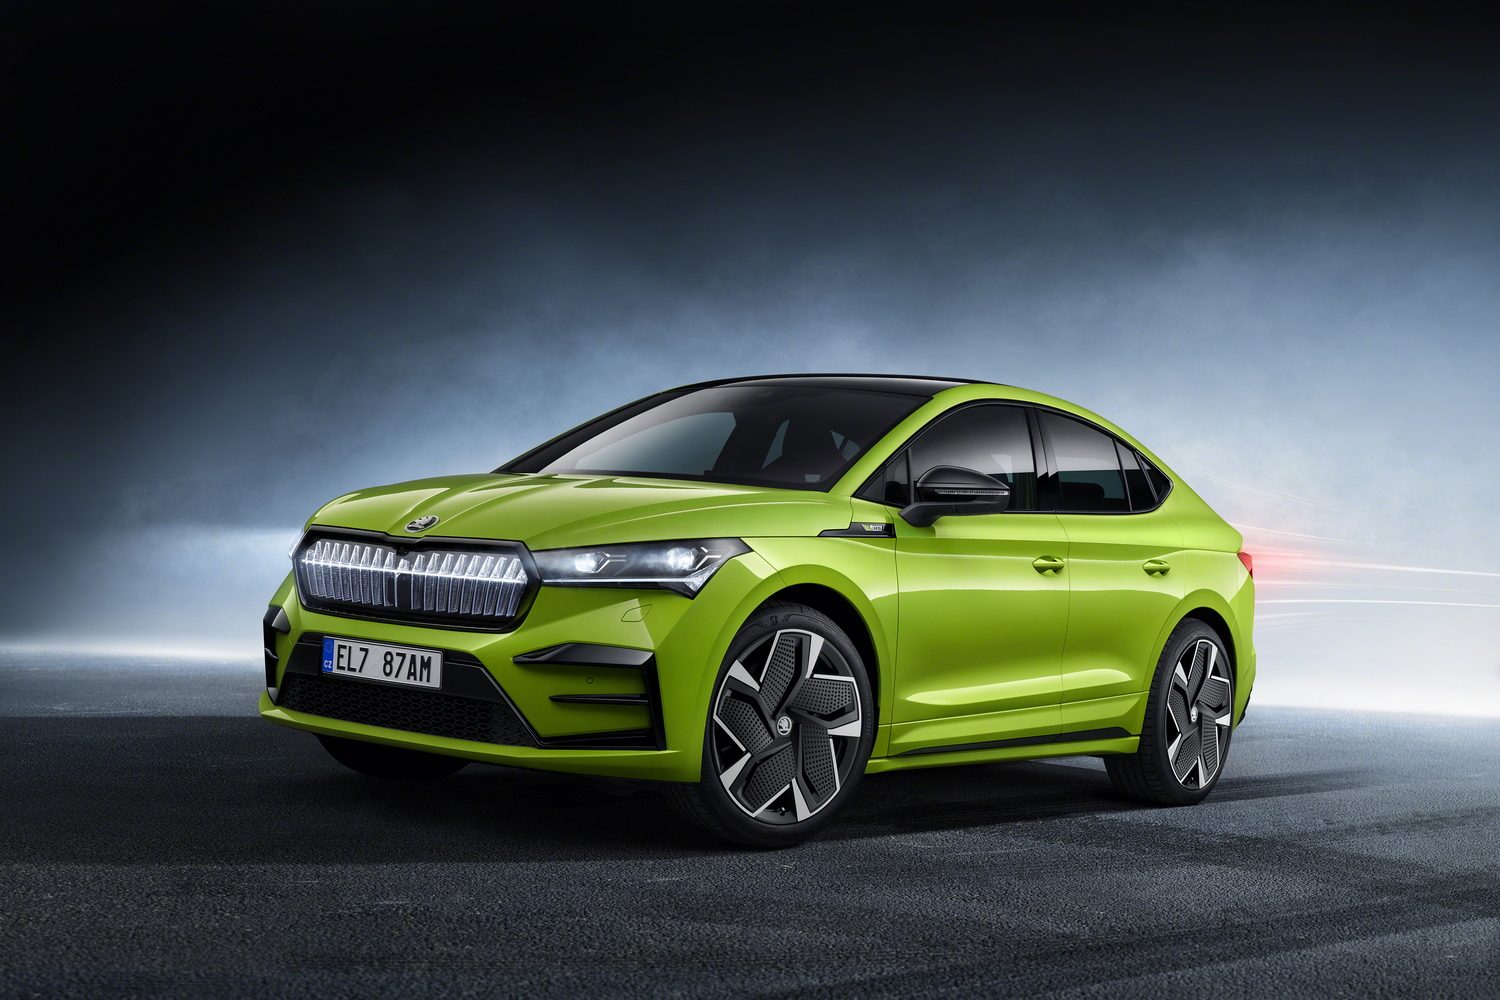 Skoda reveals new all-electric Enyaq Coupe. Image by Skoda.